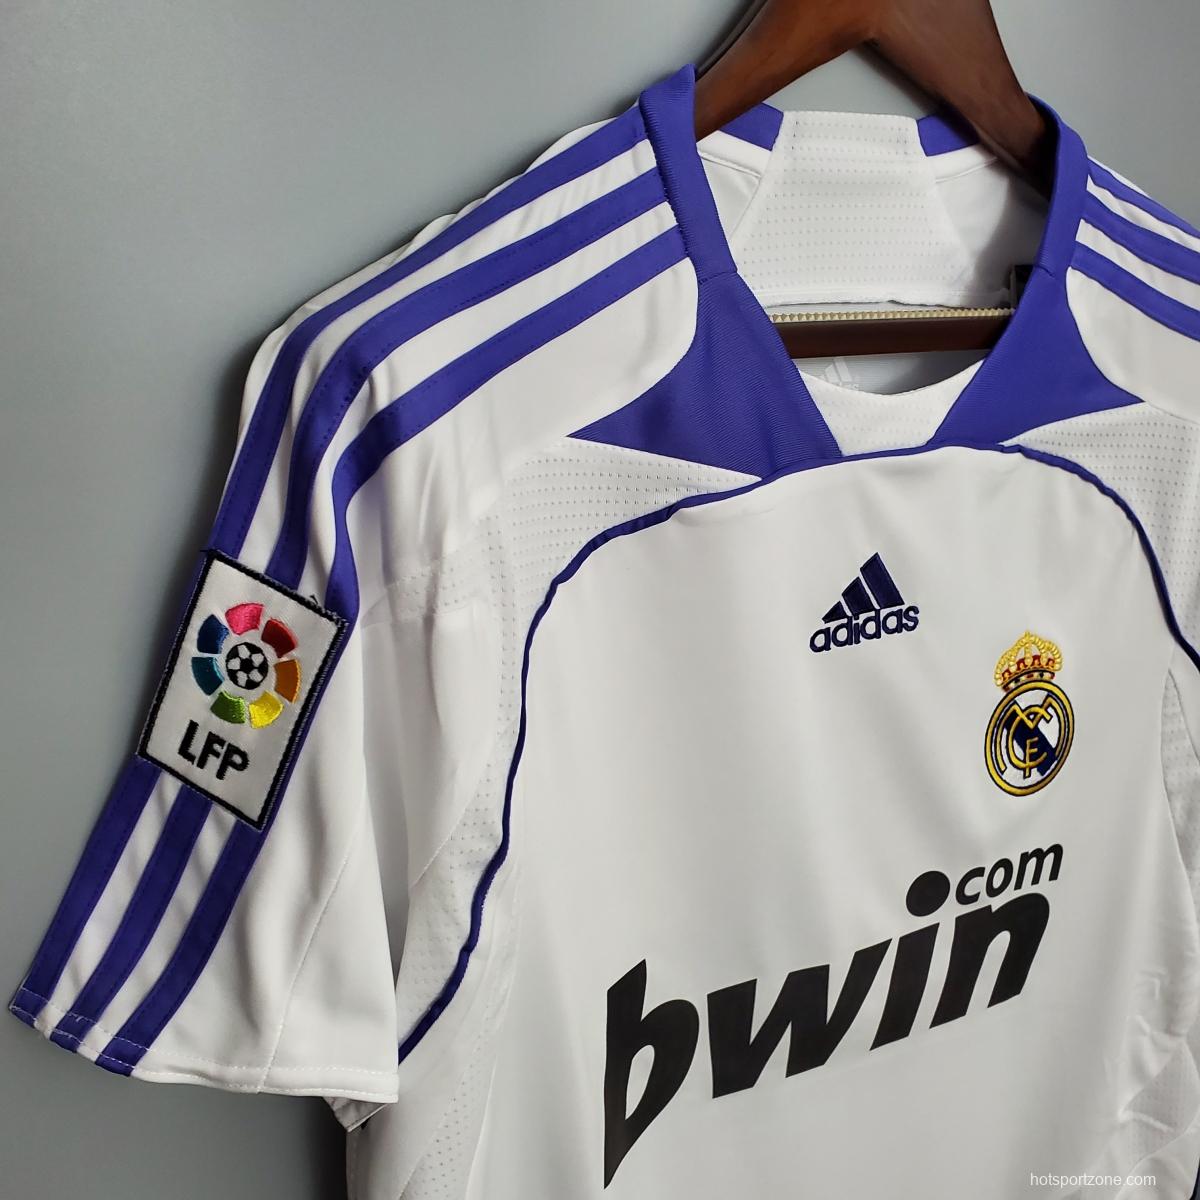 Retro Real Madrid 07/08 home Soccer Jersey